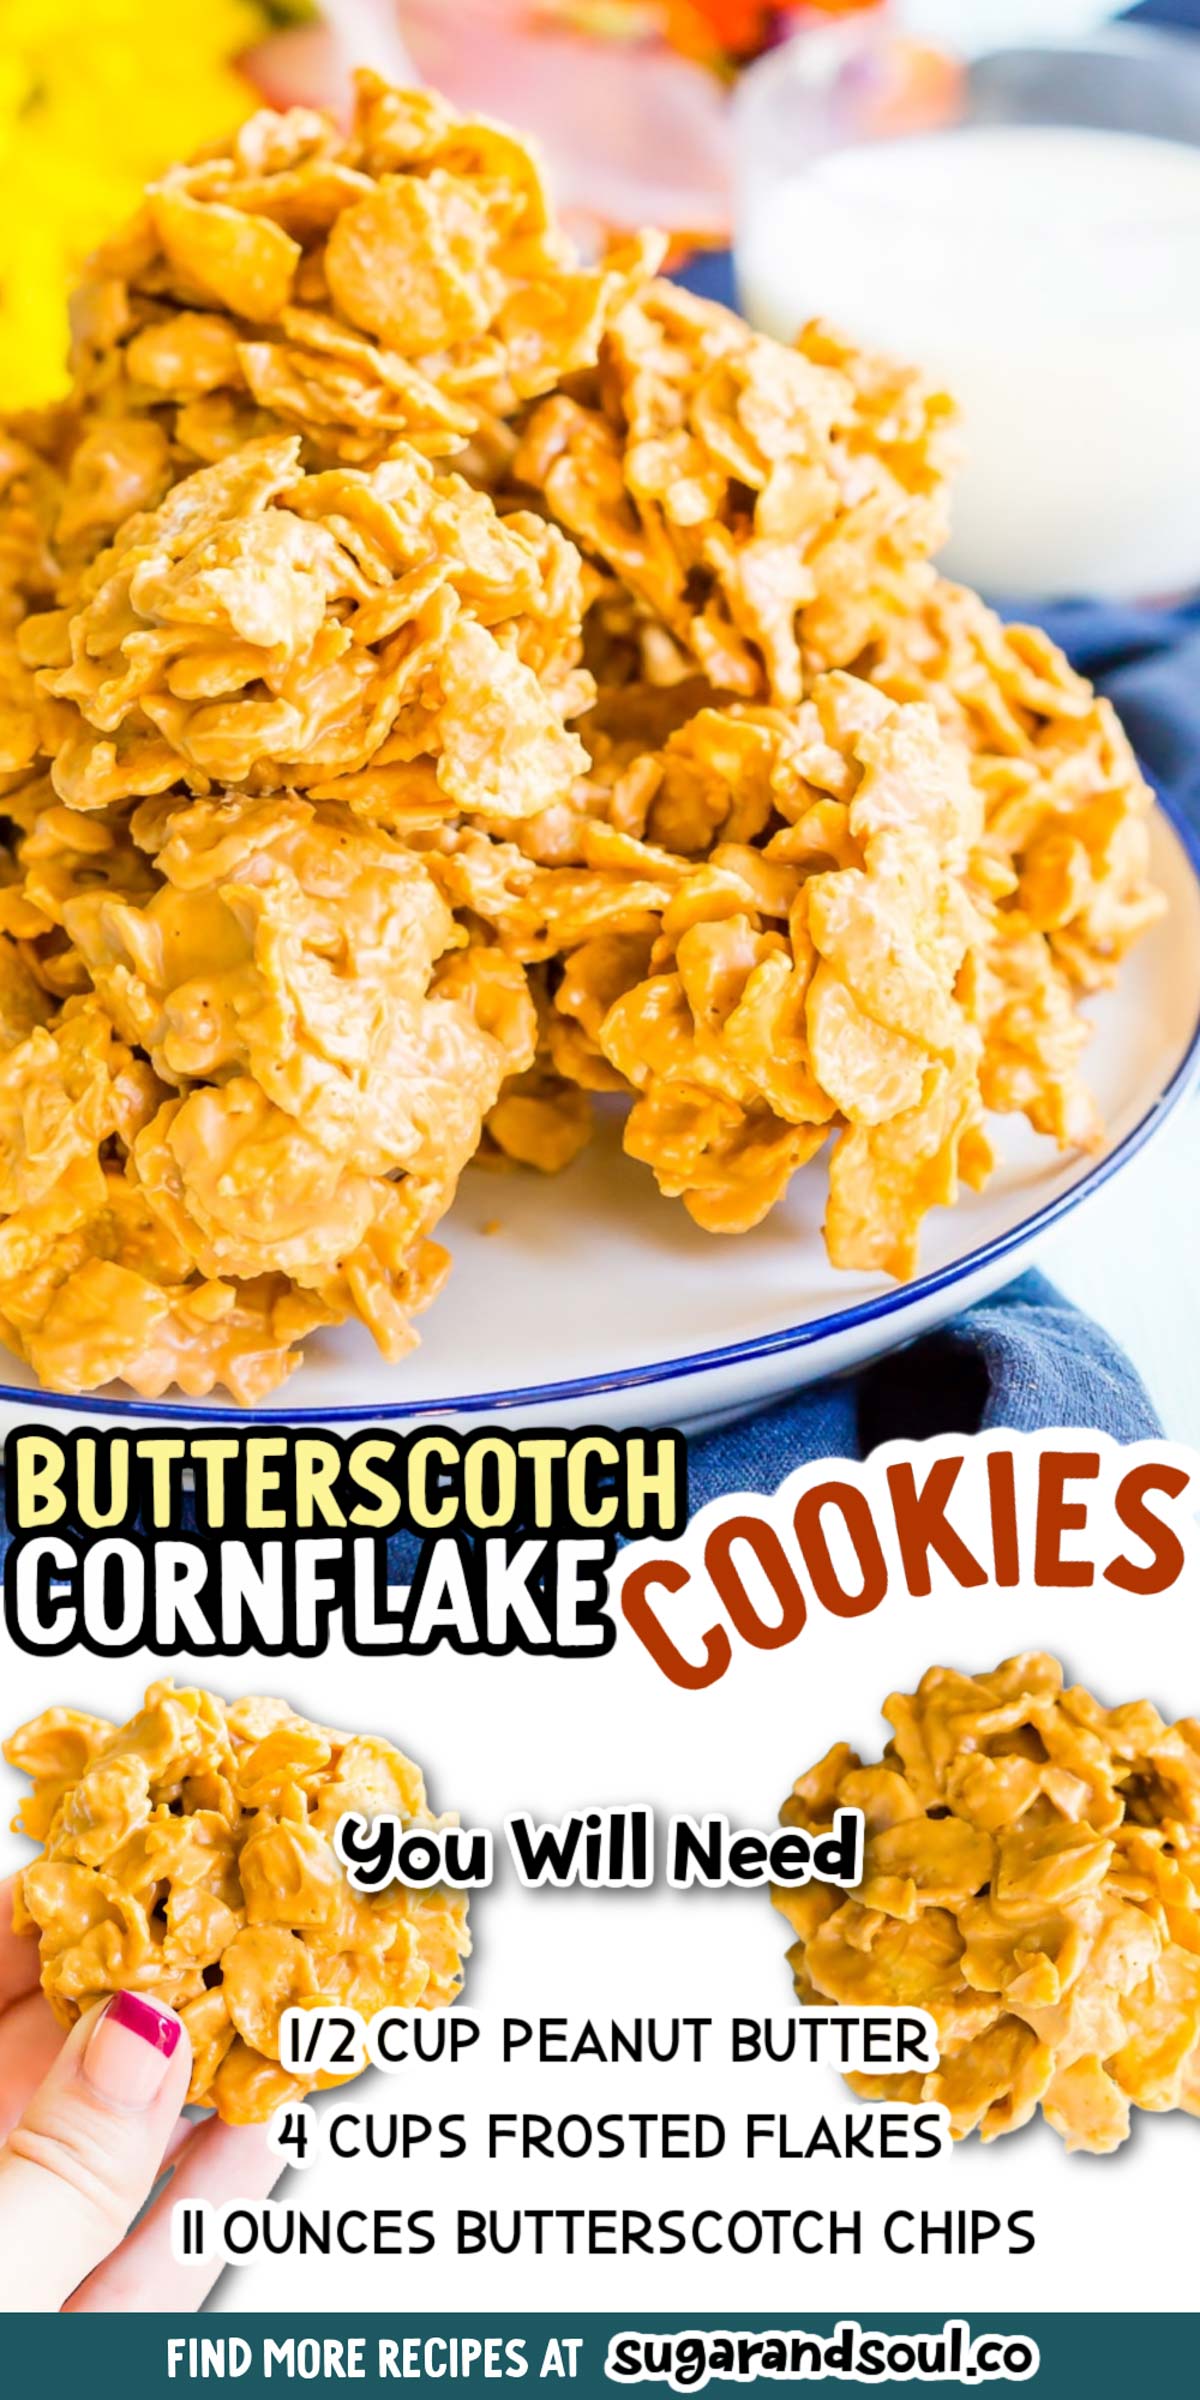 These Butterscotch Cornflake Cookies are made with just three ingredients: peanut butter, butterscotch, and frosted flakes. They're no-bake too which makes them the perfect easy dessert! via @sugarandsoulco